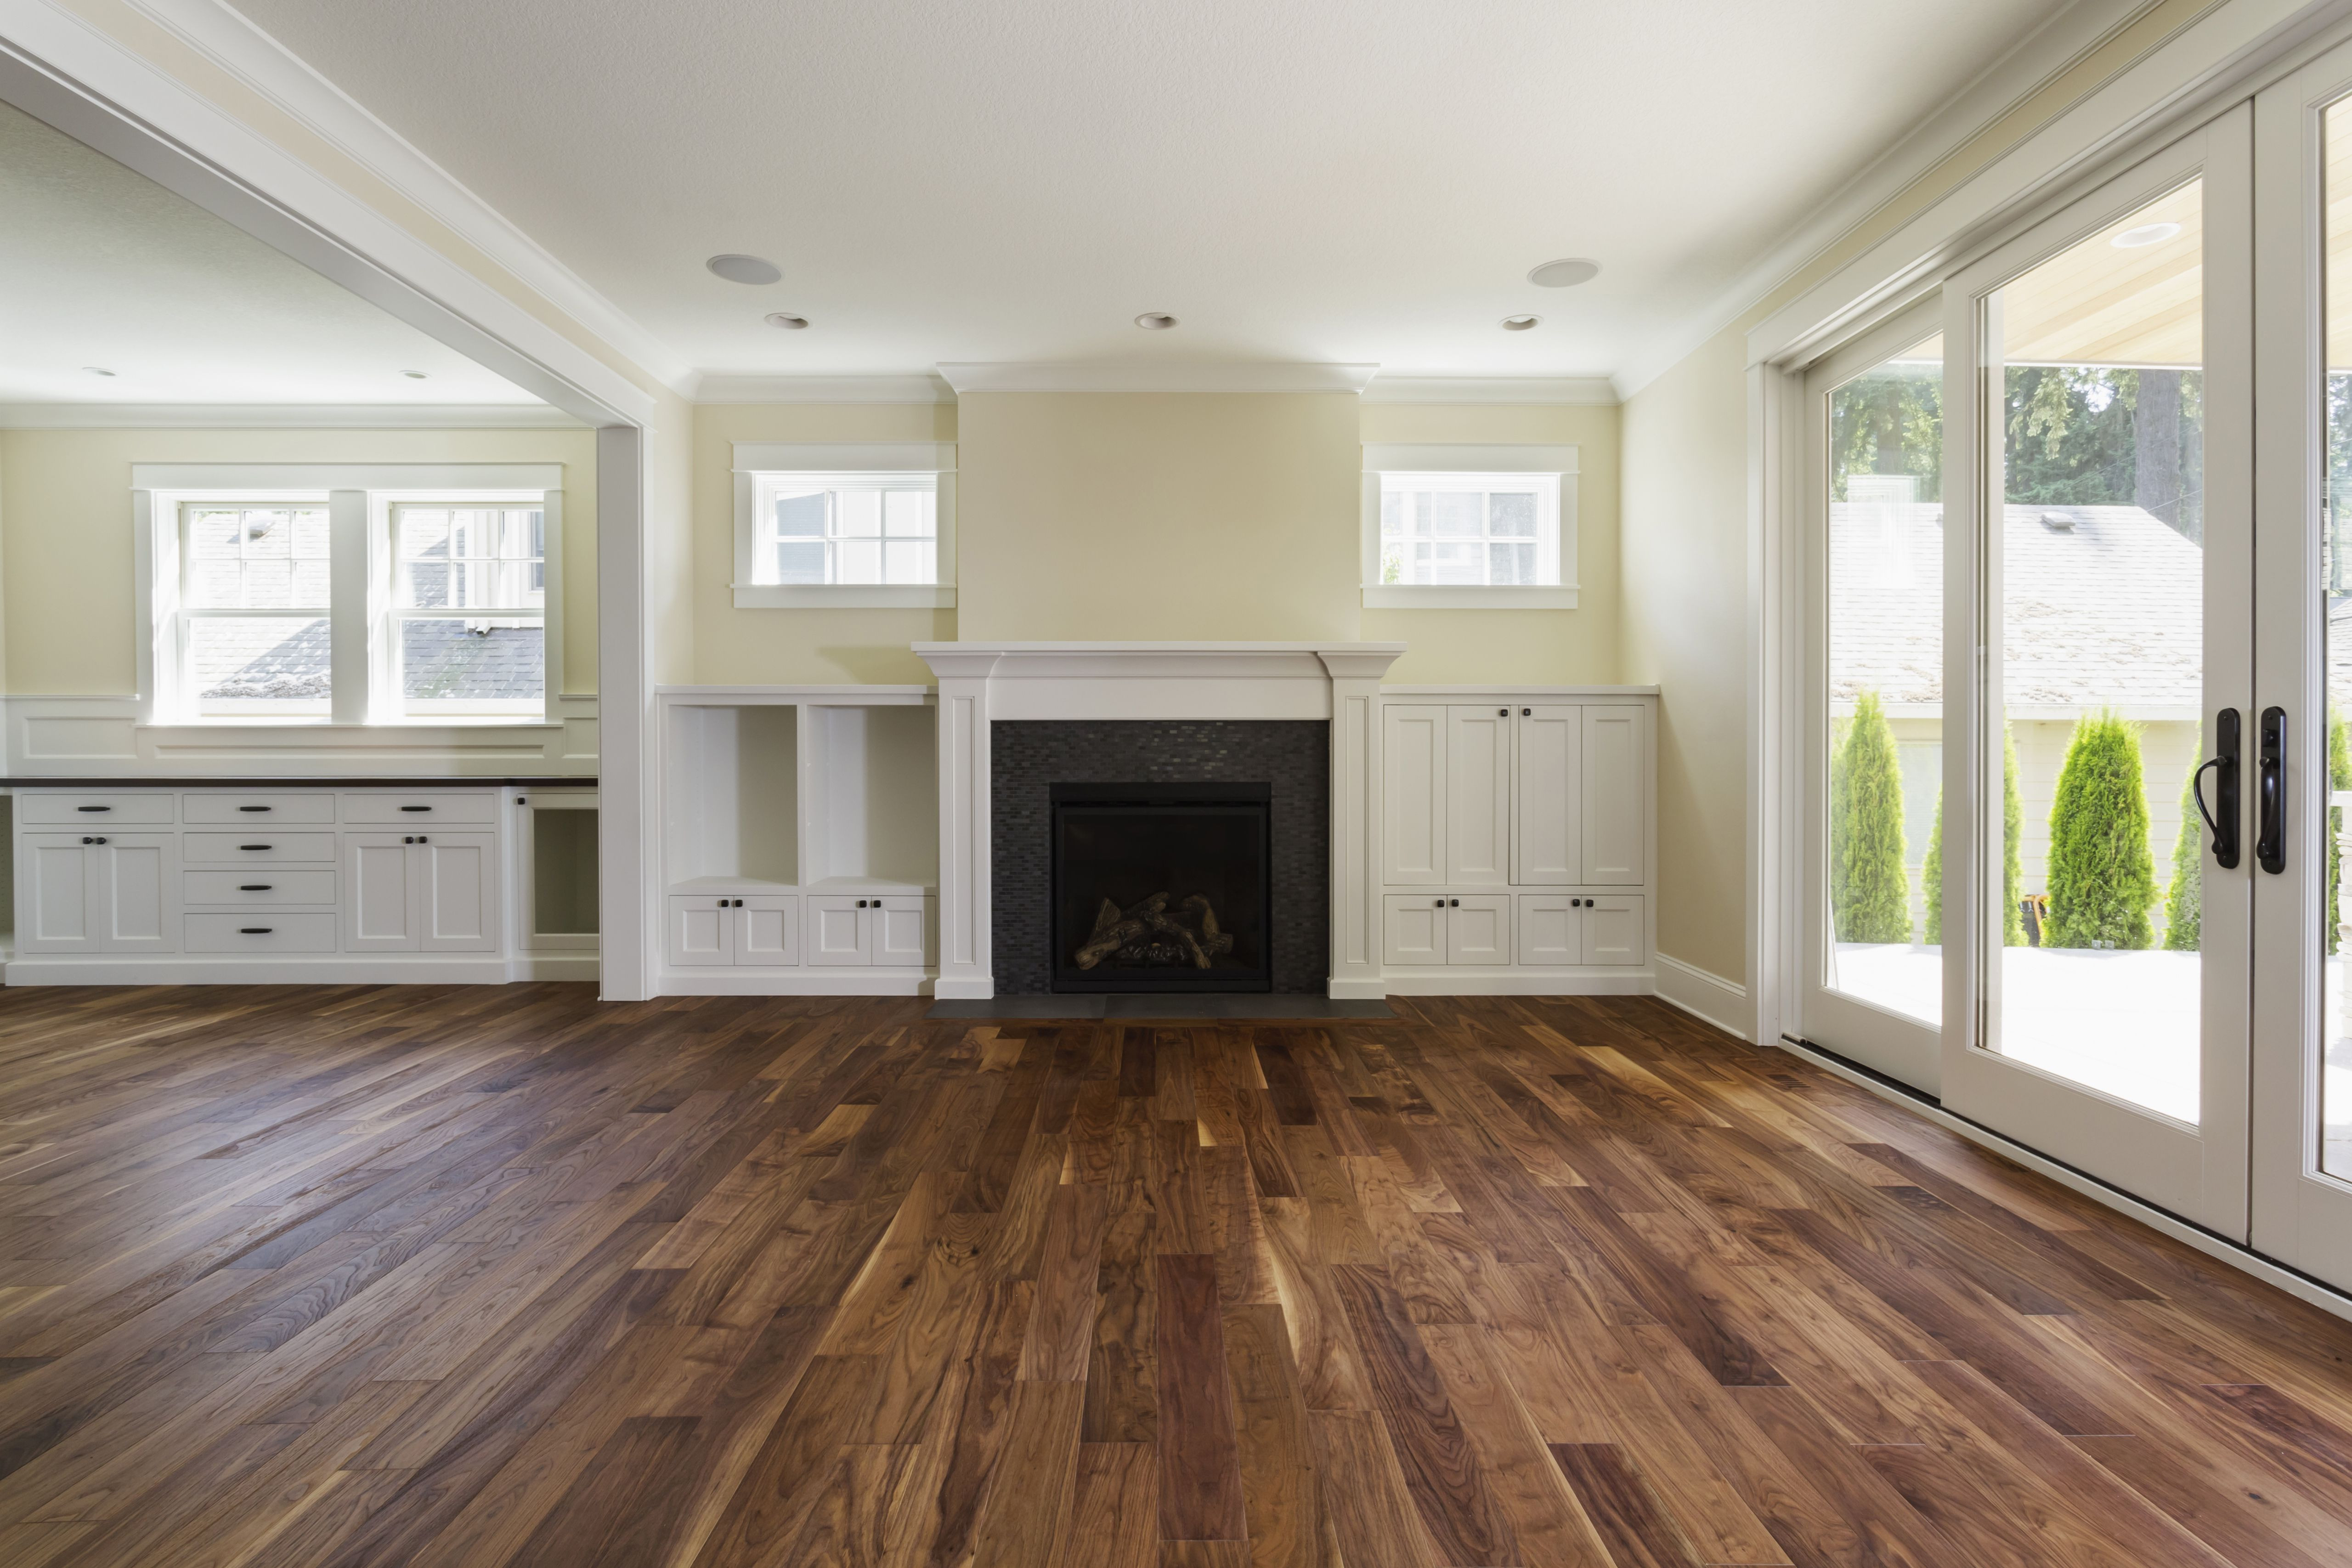 27 Amazing Hardwood Floor Manufacturers Ratings 2024 free download hardwood floor manufacturers ratings of the pros and cons of prefinished hardwood flooring within fireplace and built in shelves in living room 482143011 57bef8e33df78cc16e035397